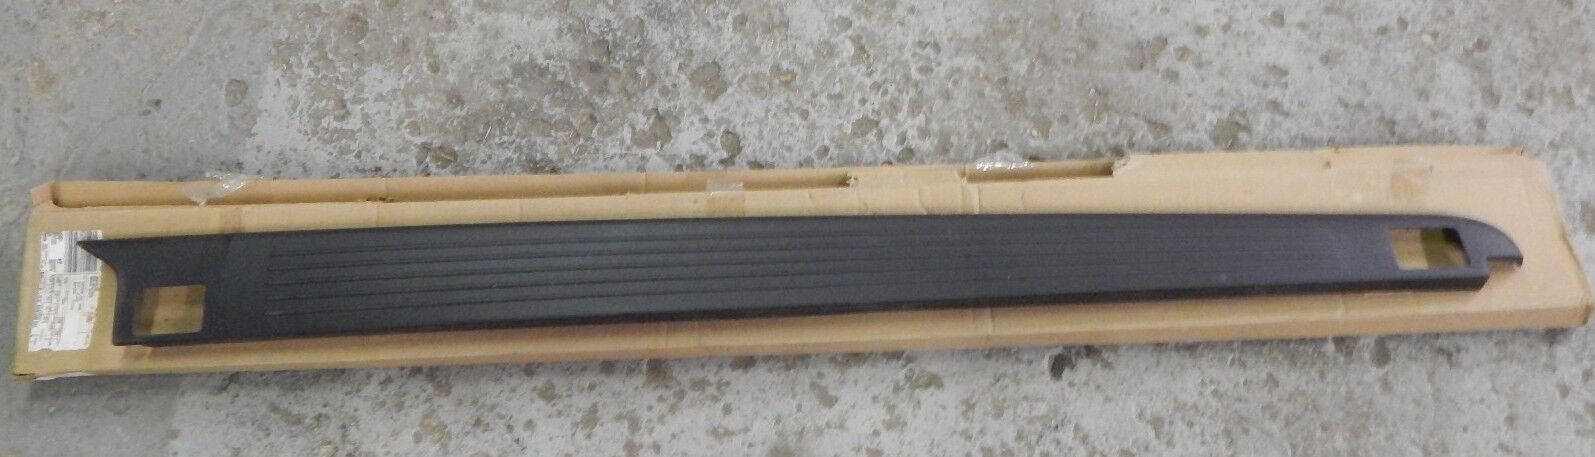 New OEM 2006-2008 Lincoln Mark LT Rear Bed Tail Top Moulding Trim Panel Right